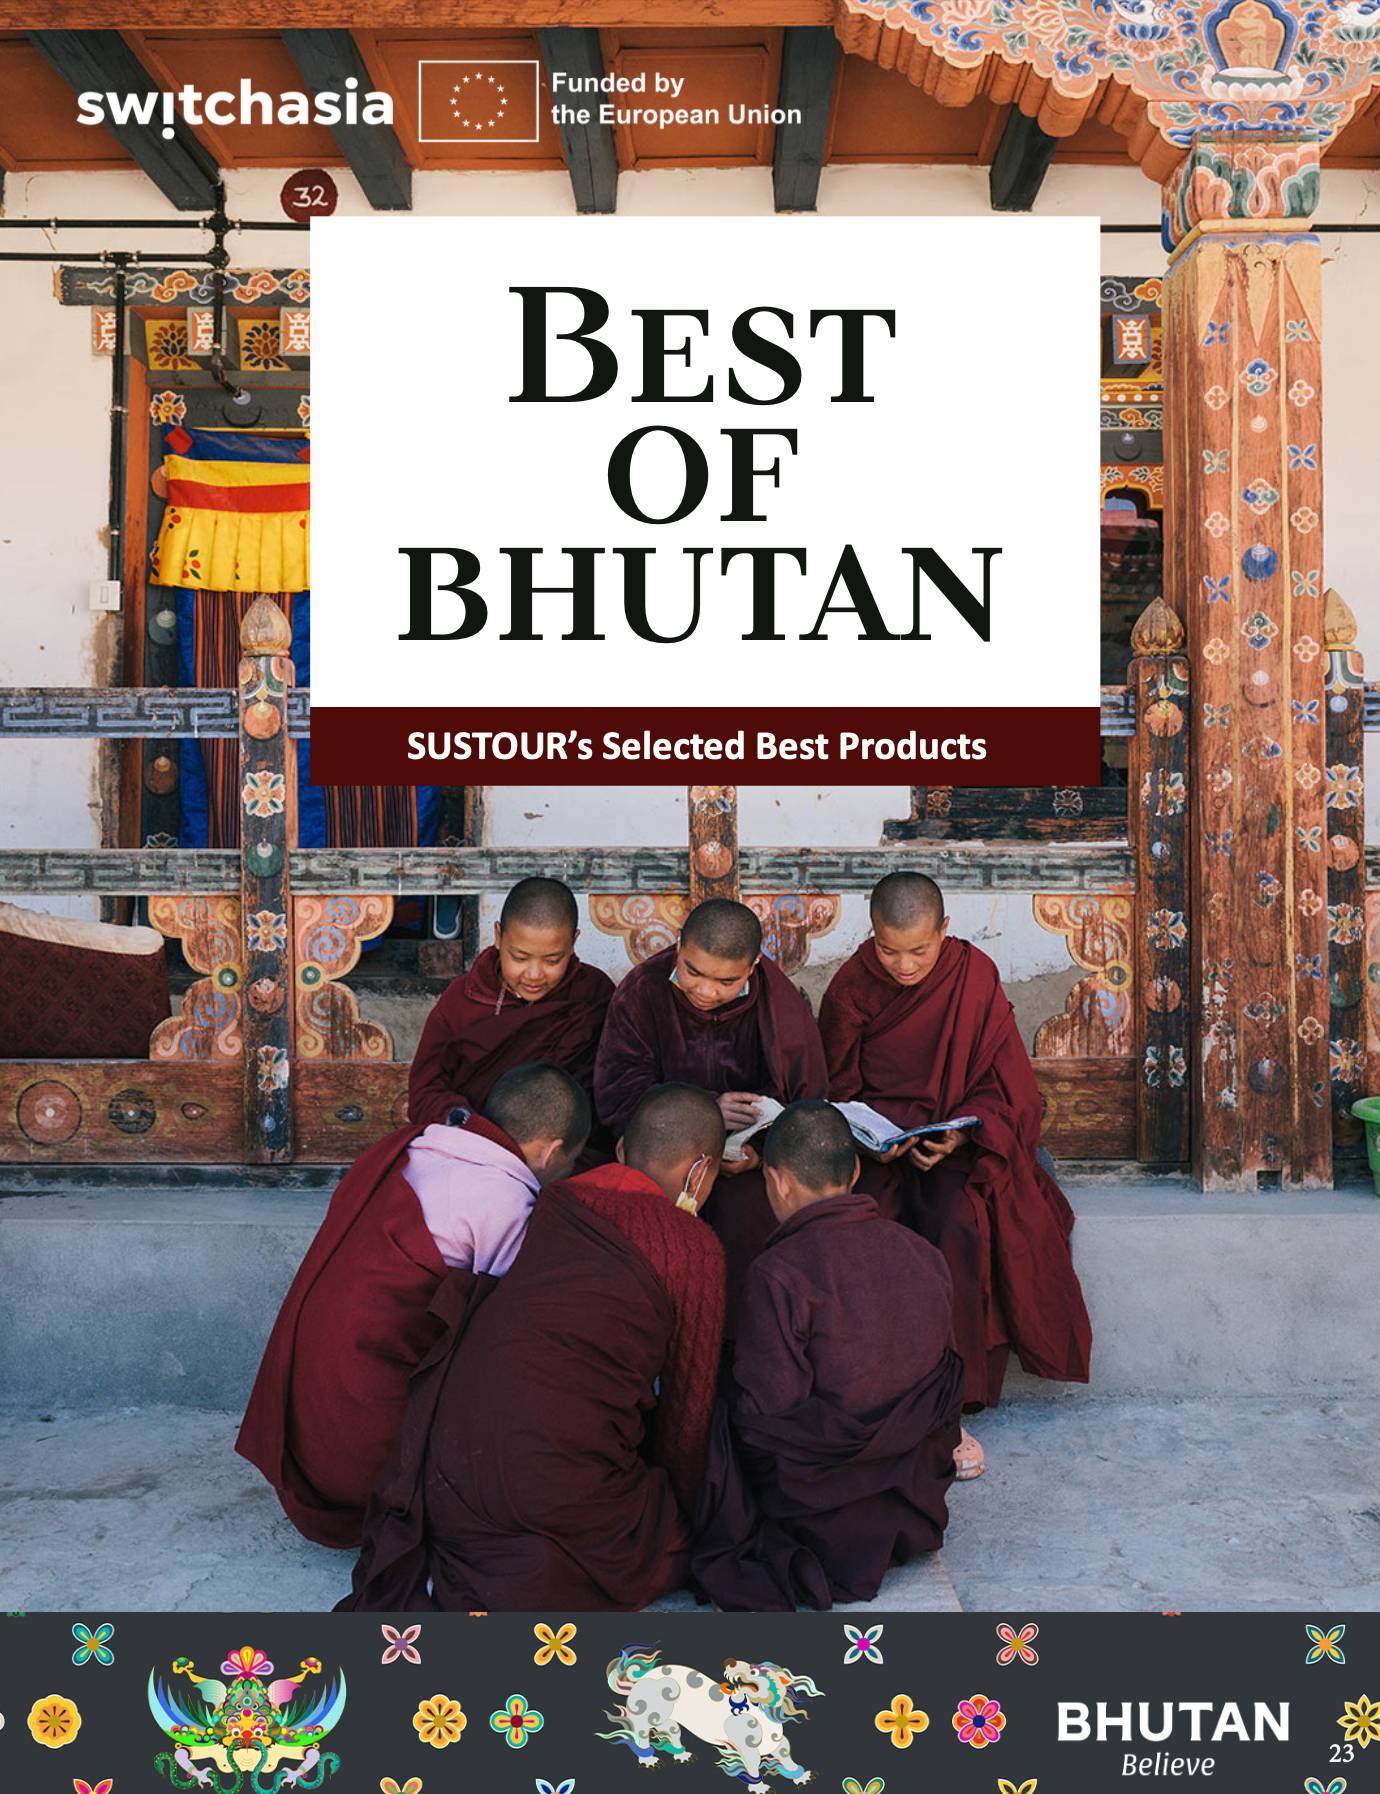 Best of Bhutan: SUSTOUR's Selected Best Products